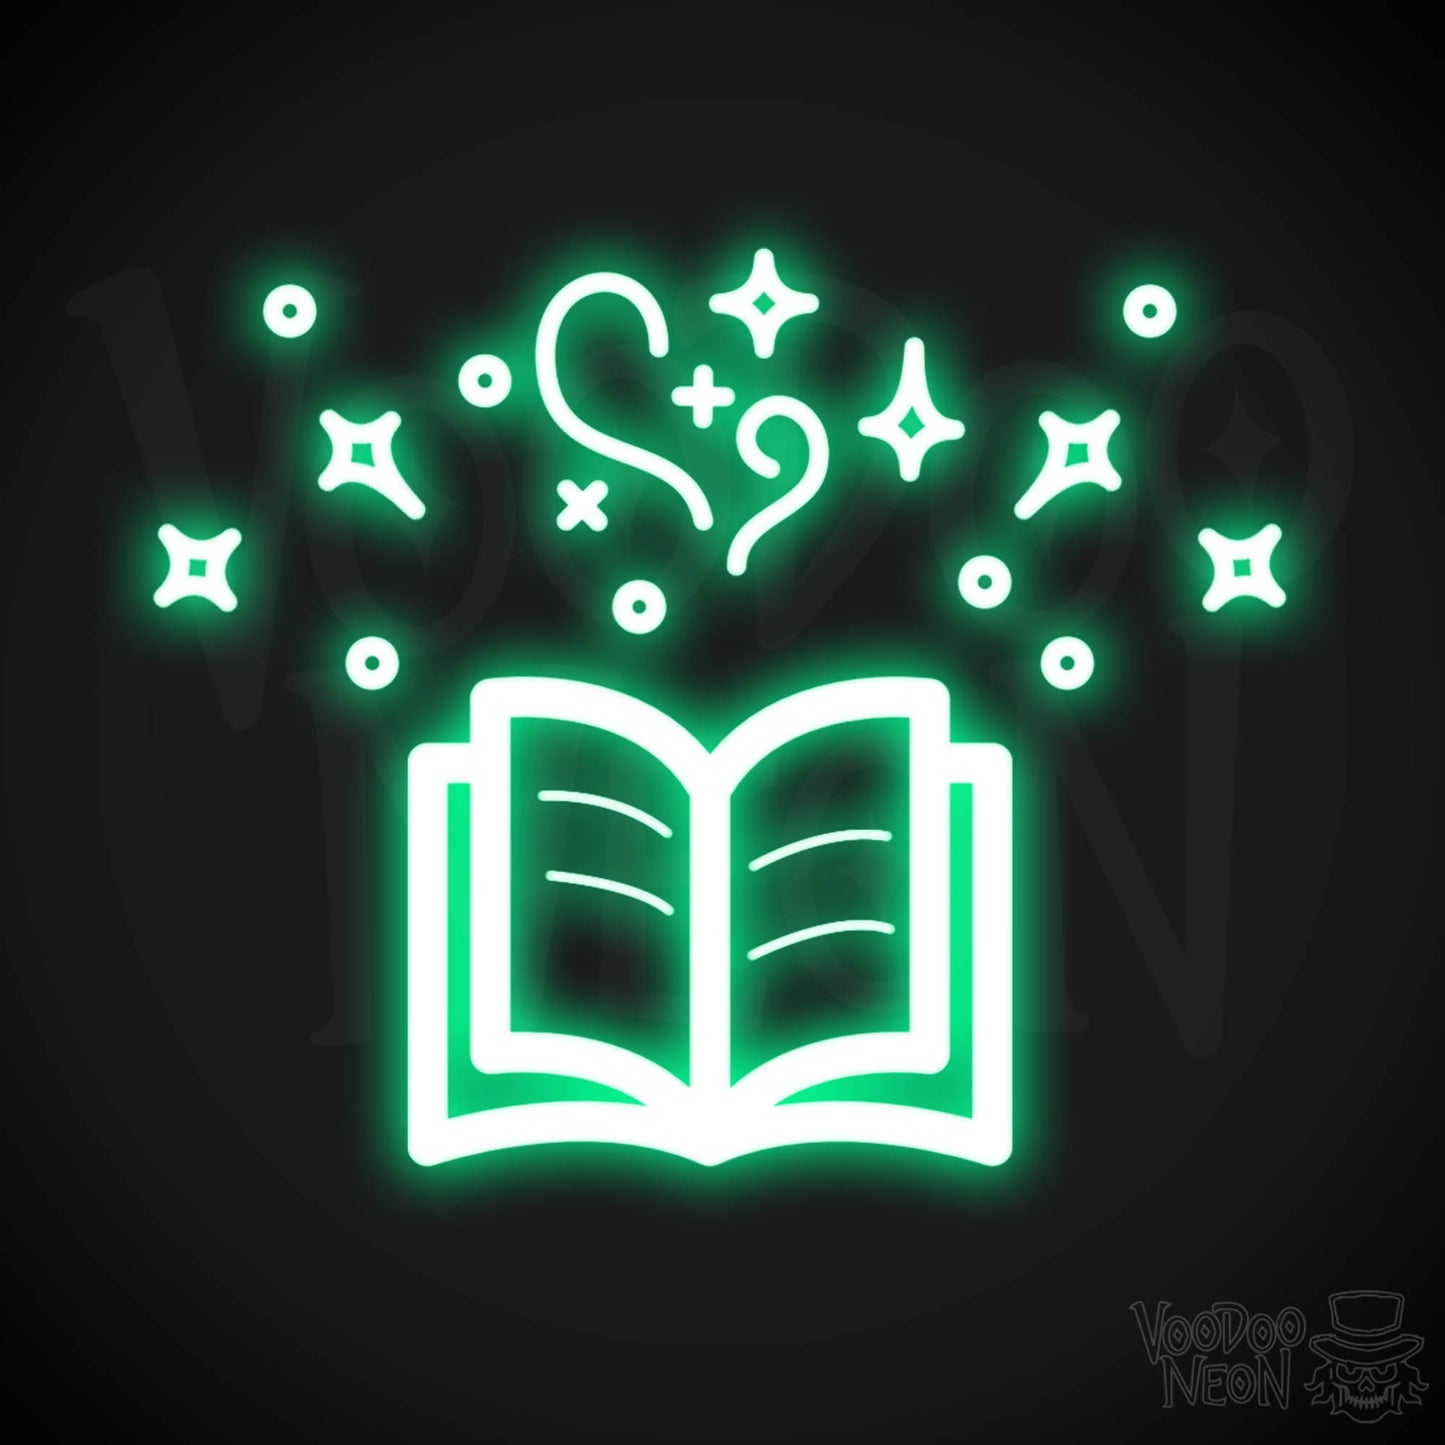 Neon Spell Book - Spell Book Neon Sign - LED Neon Wall Art - Color Green